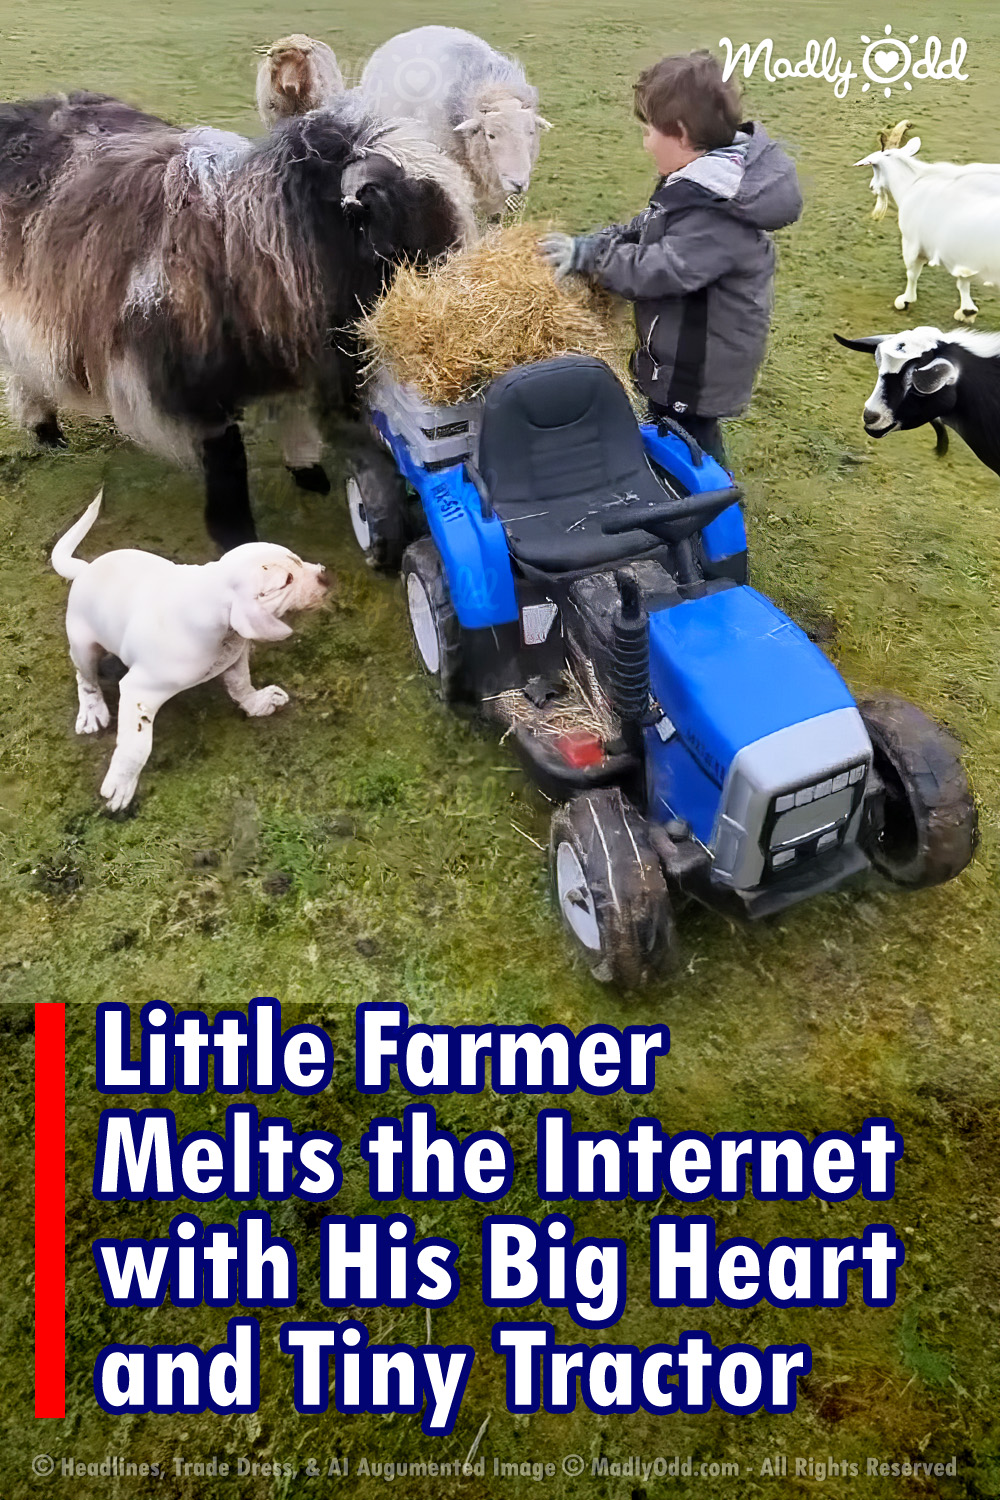 Little Farmer Melts The Internet With His Big Heart and Tiny Tractor